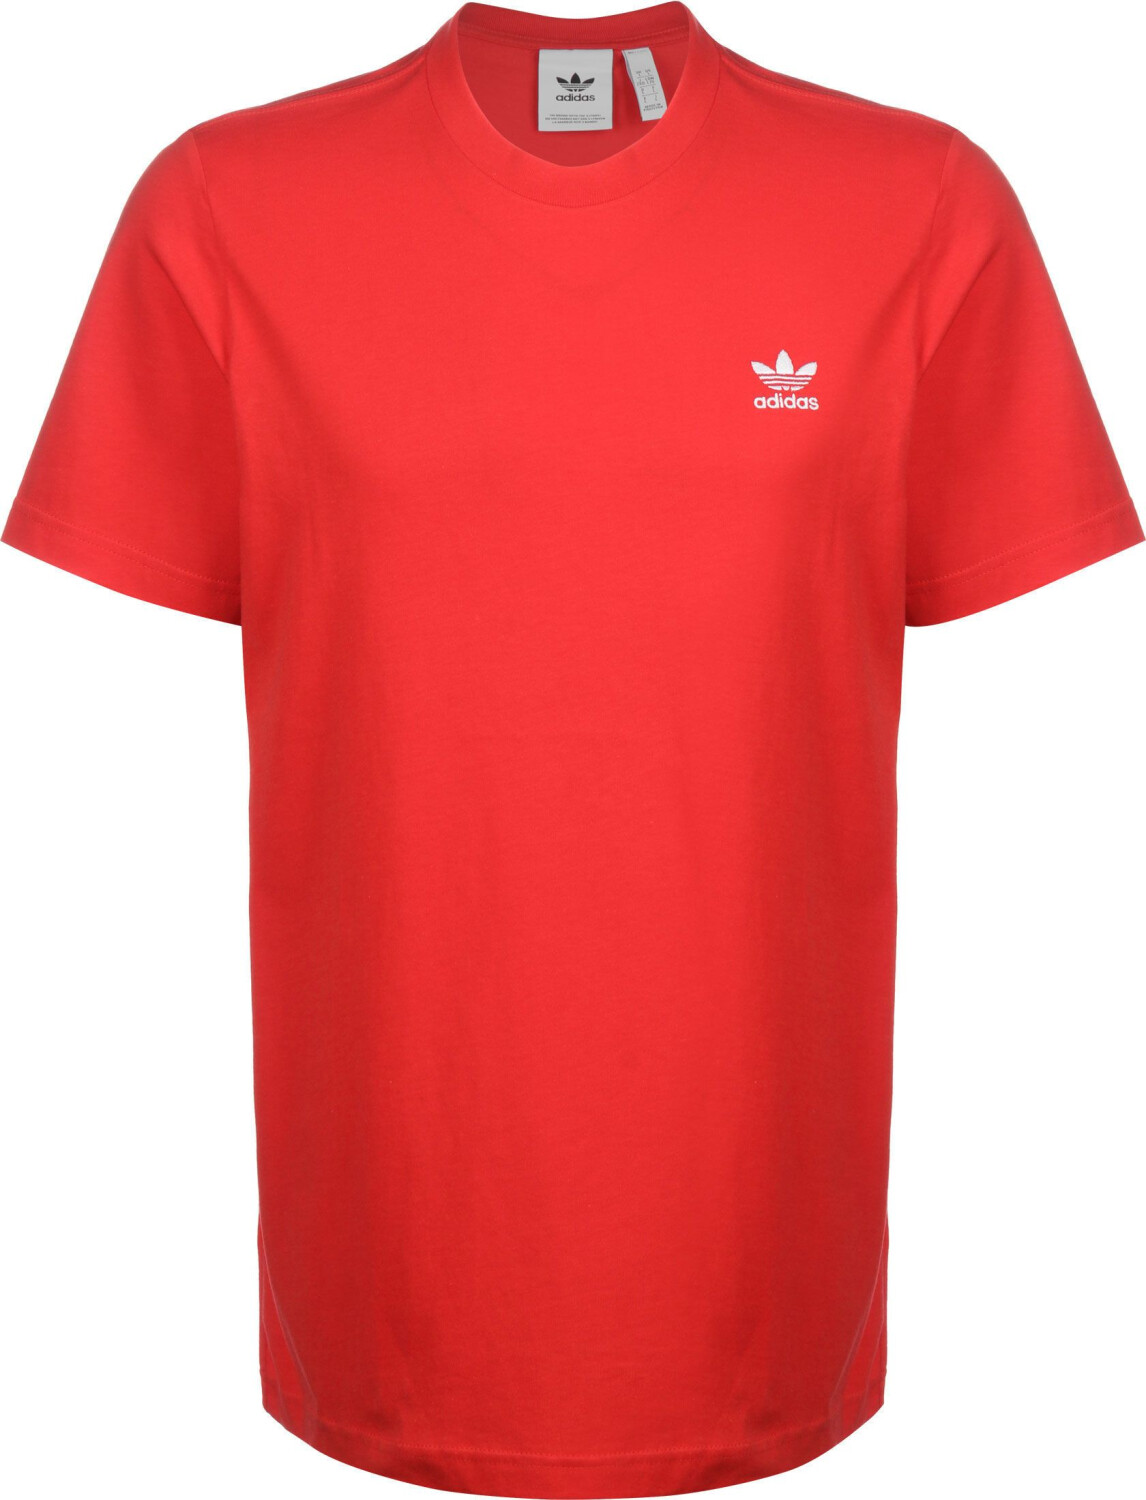 Buy Adidas Trefoil – £9.99 (Today) Deals Essentials from Best on T-Shirt